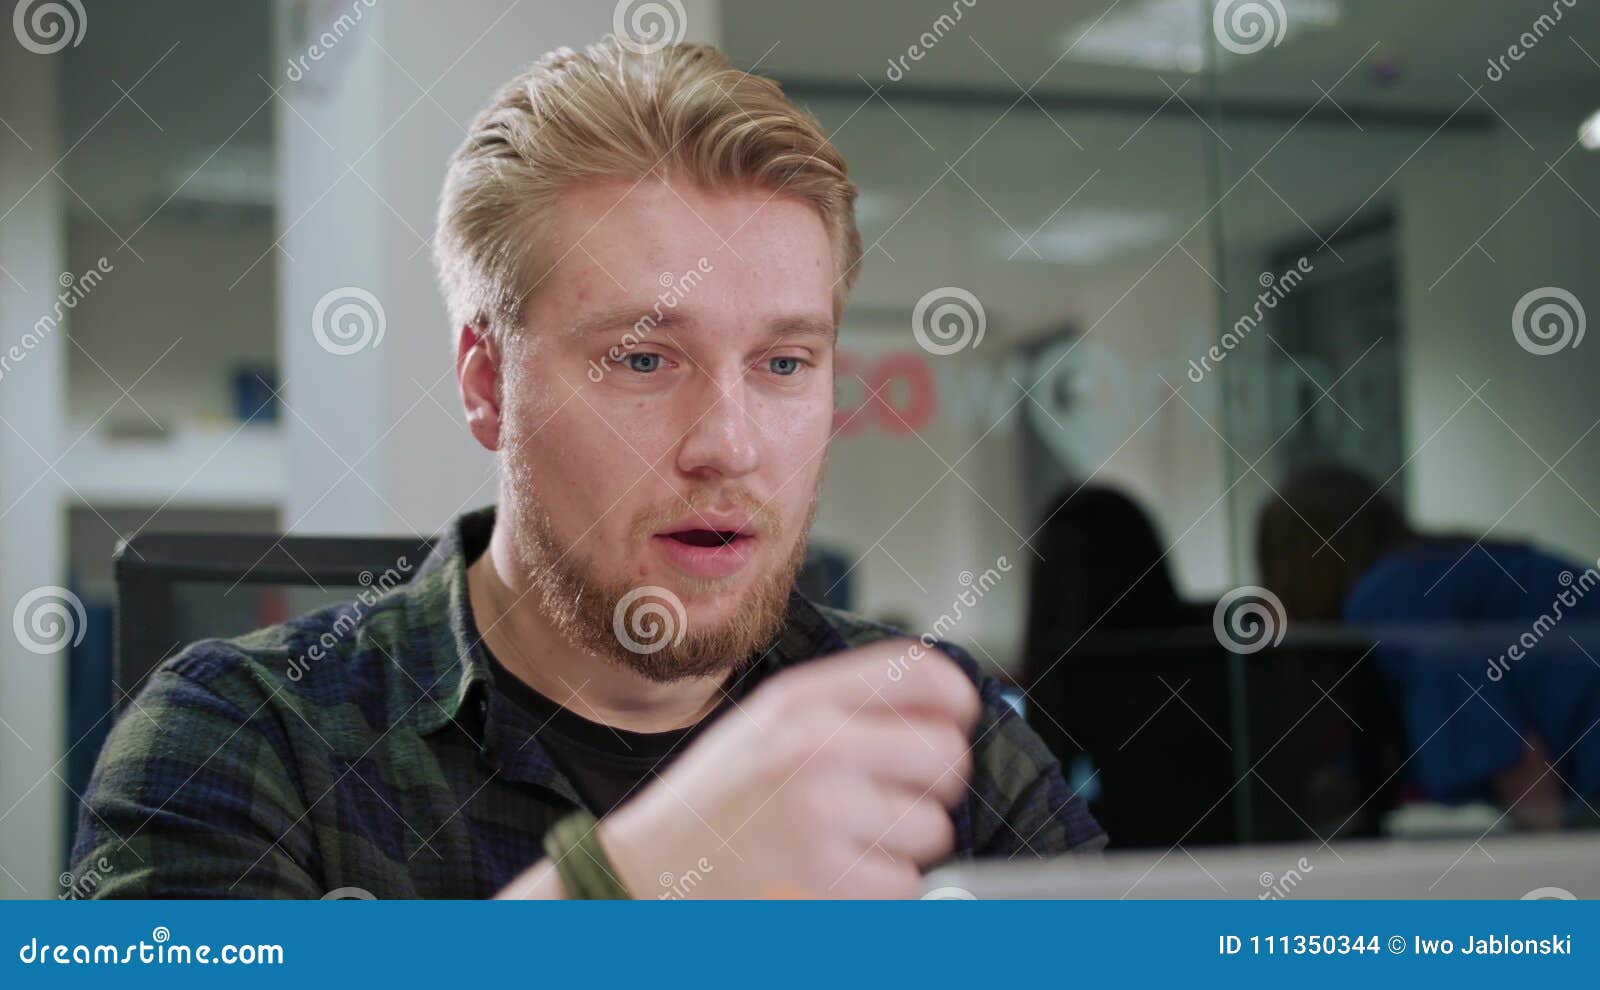 Young Blonde Man Headshot - wide 4